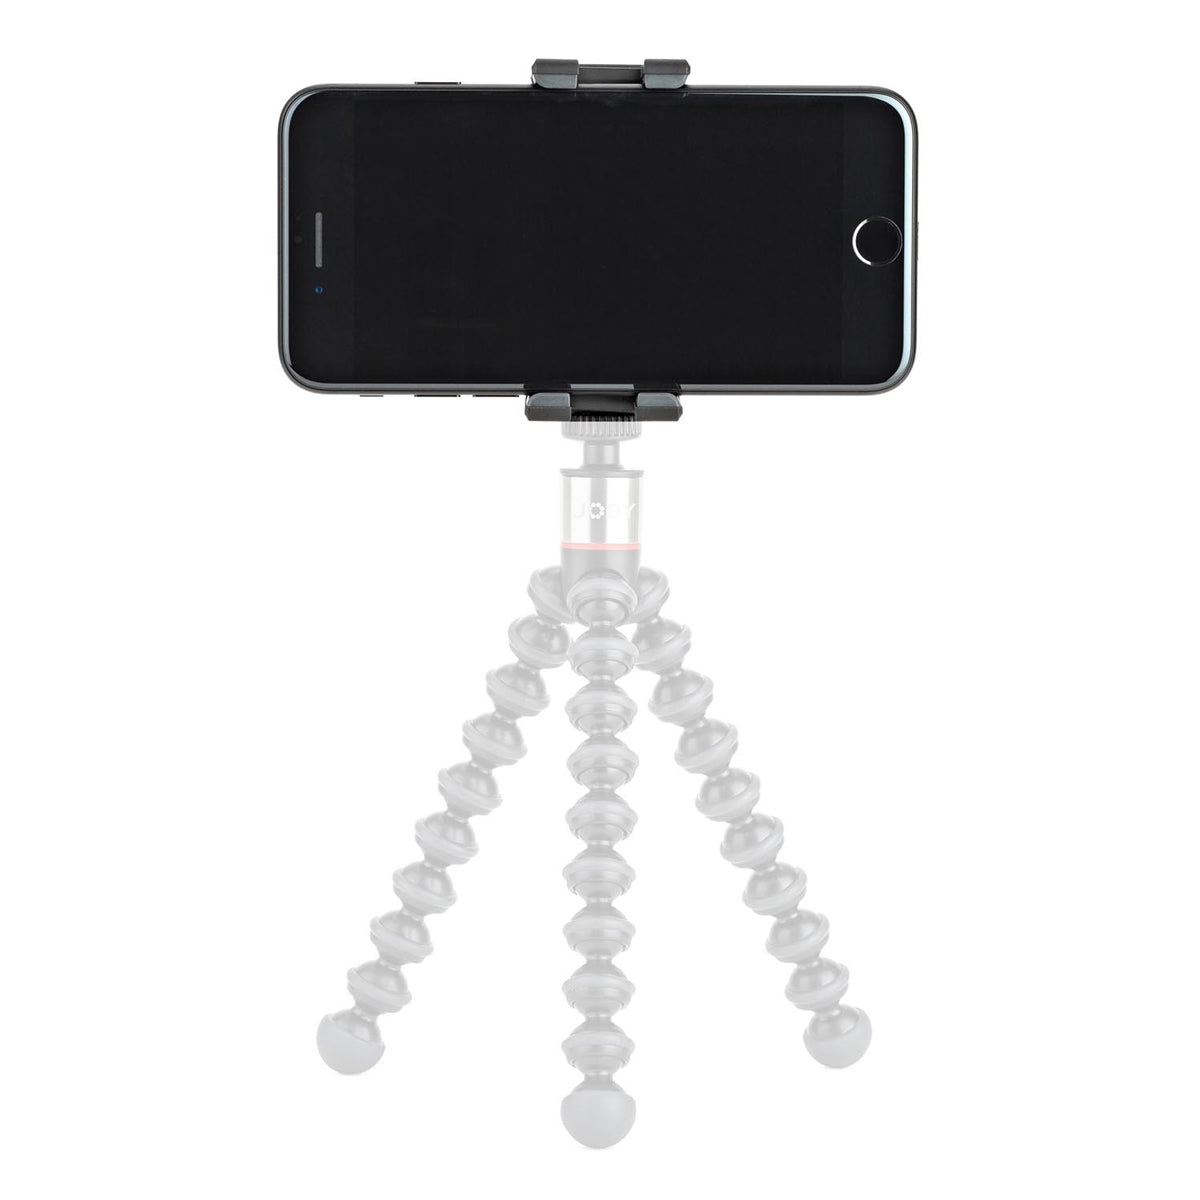 Joby GripTight ONE Mount for Smartphones